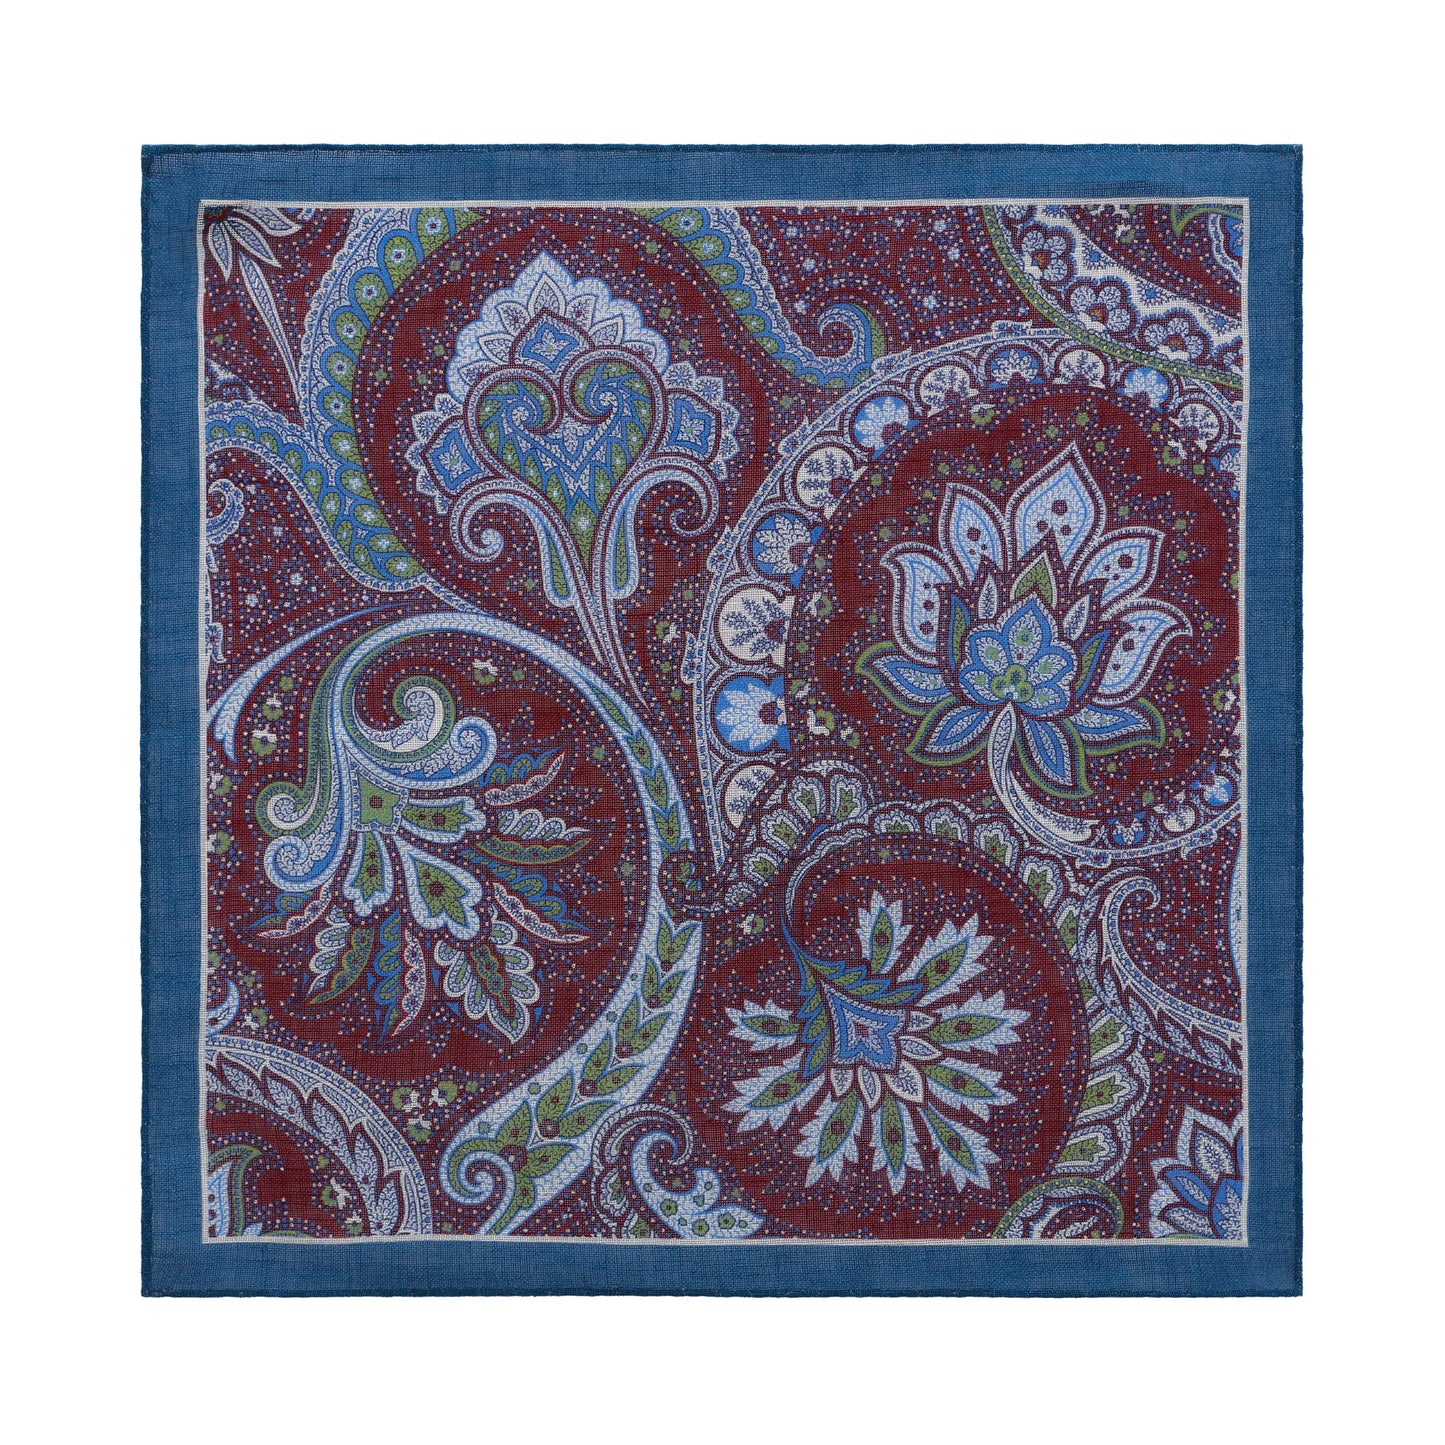 Printed Linen Pocket Square in Blue